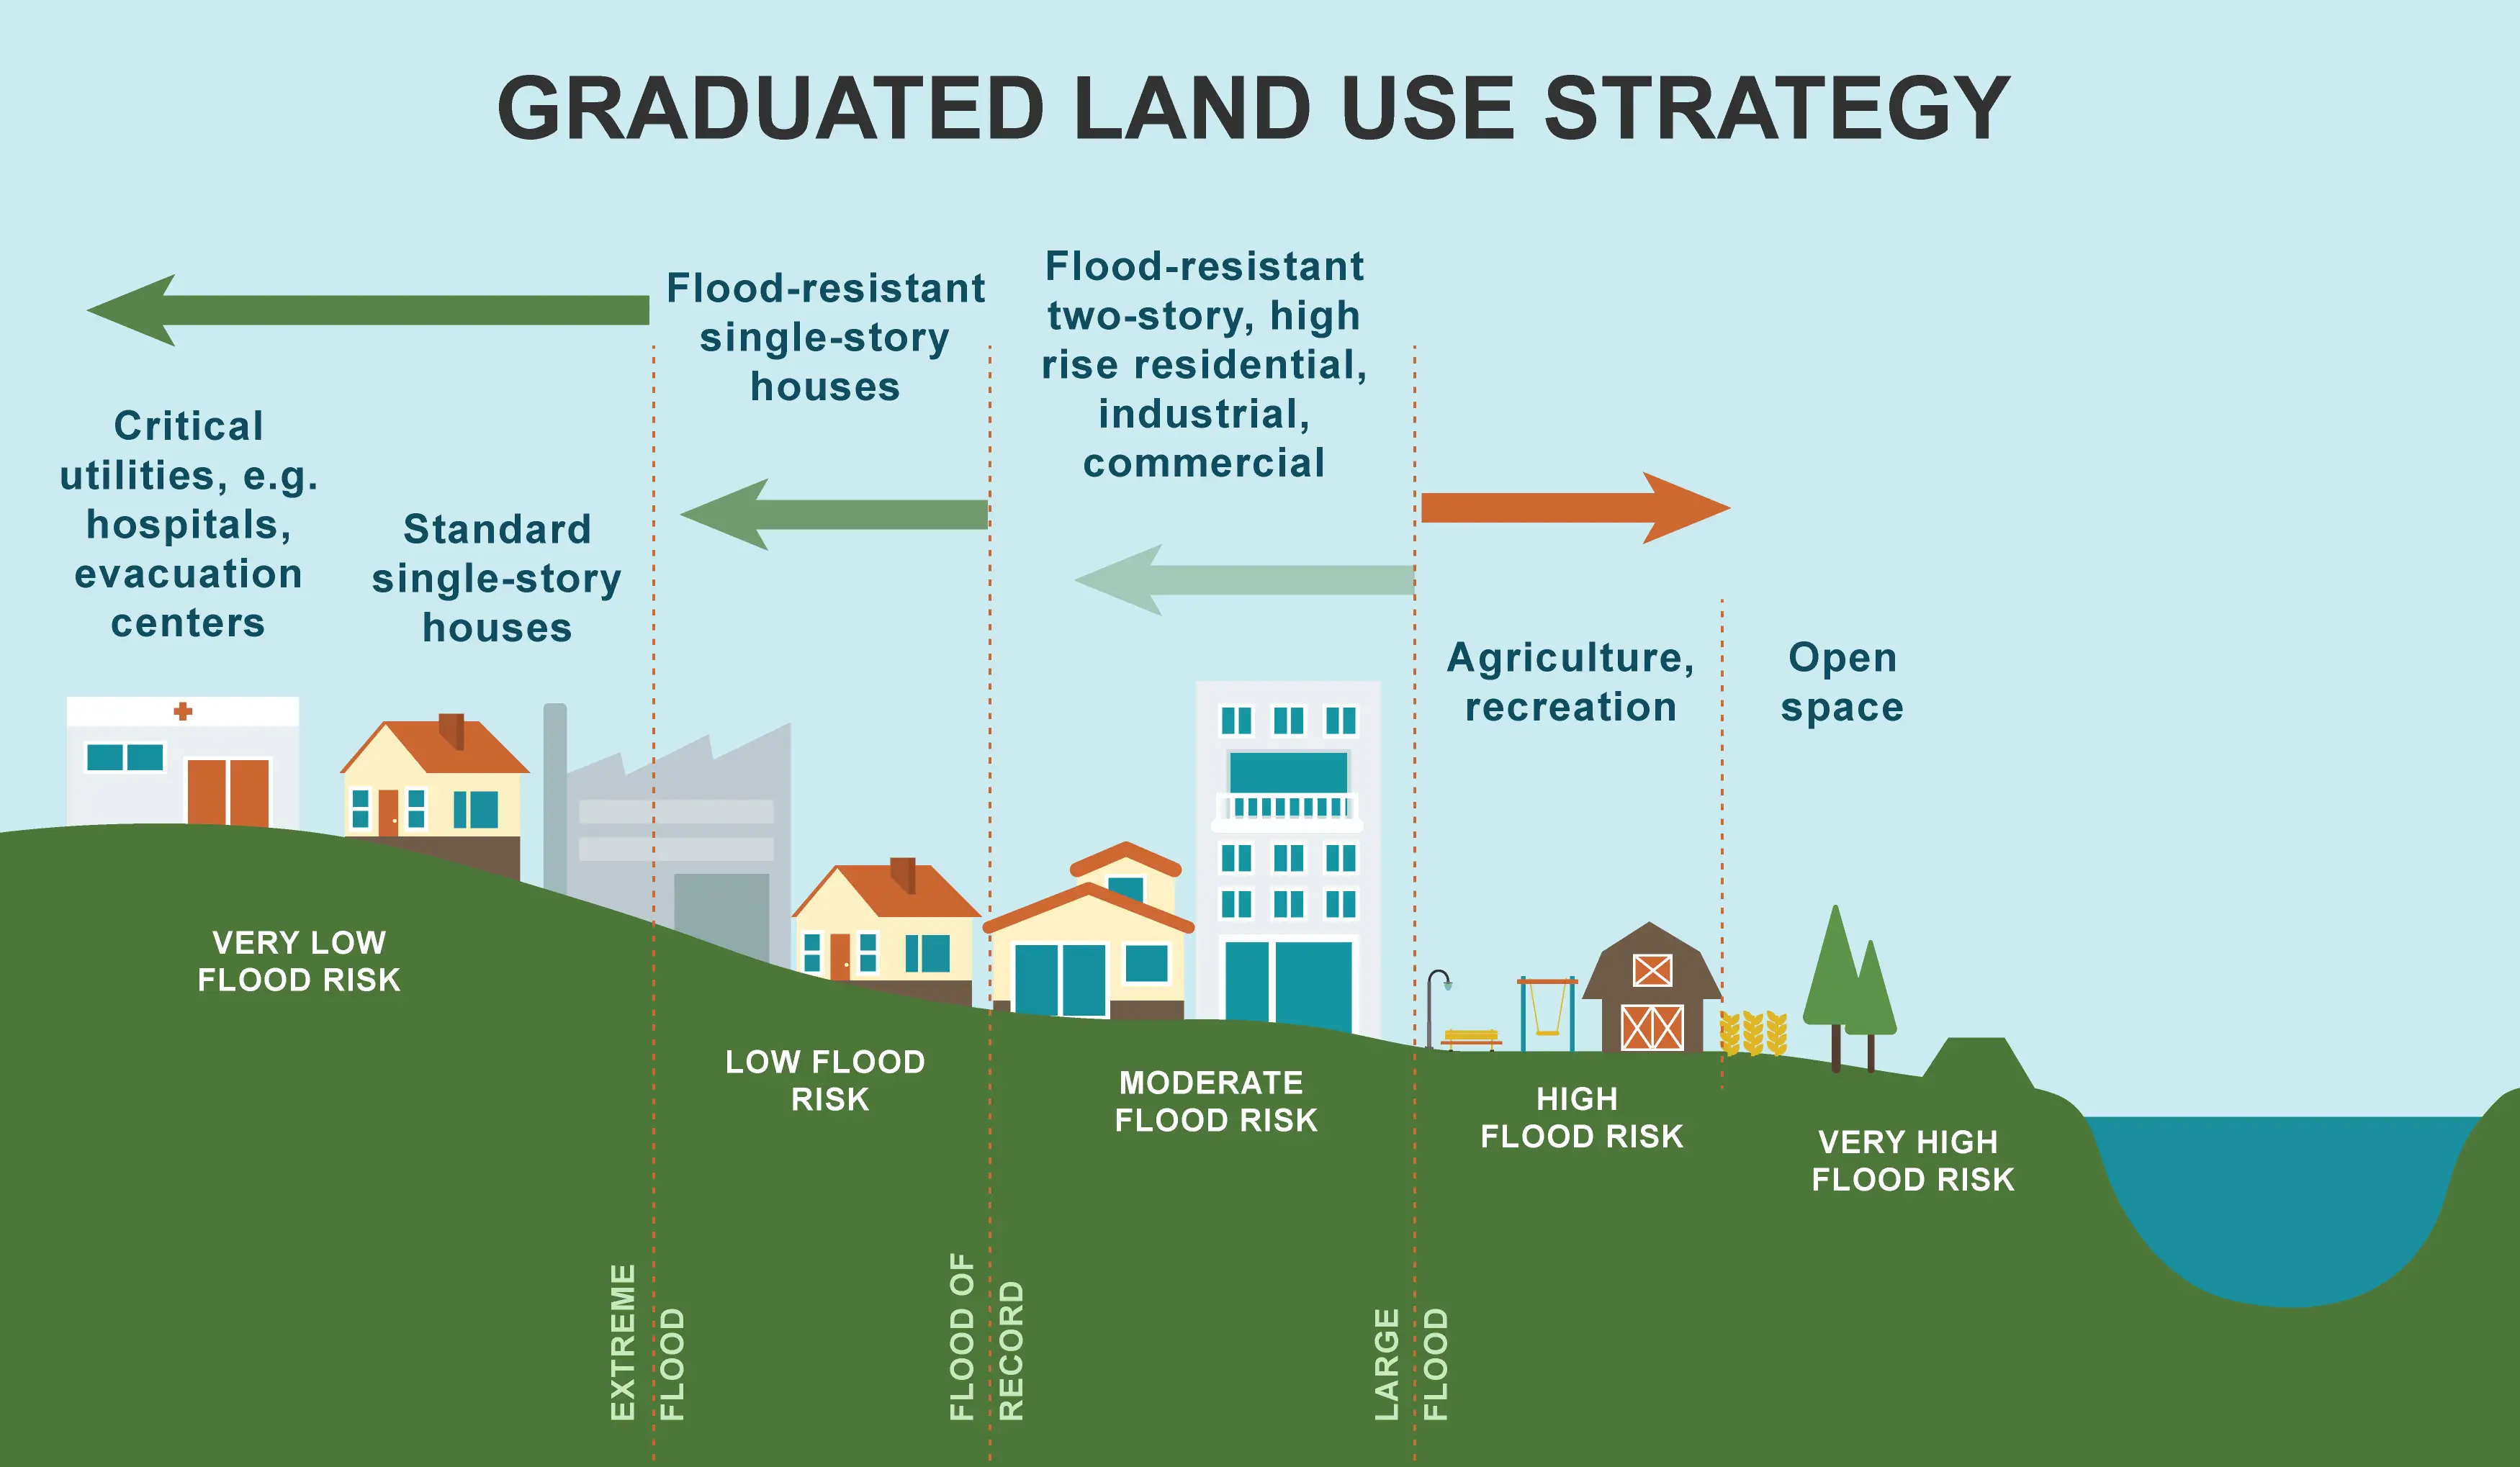 Digram that descibes and provides a visual of the graduated land use strategy